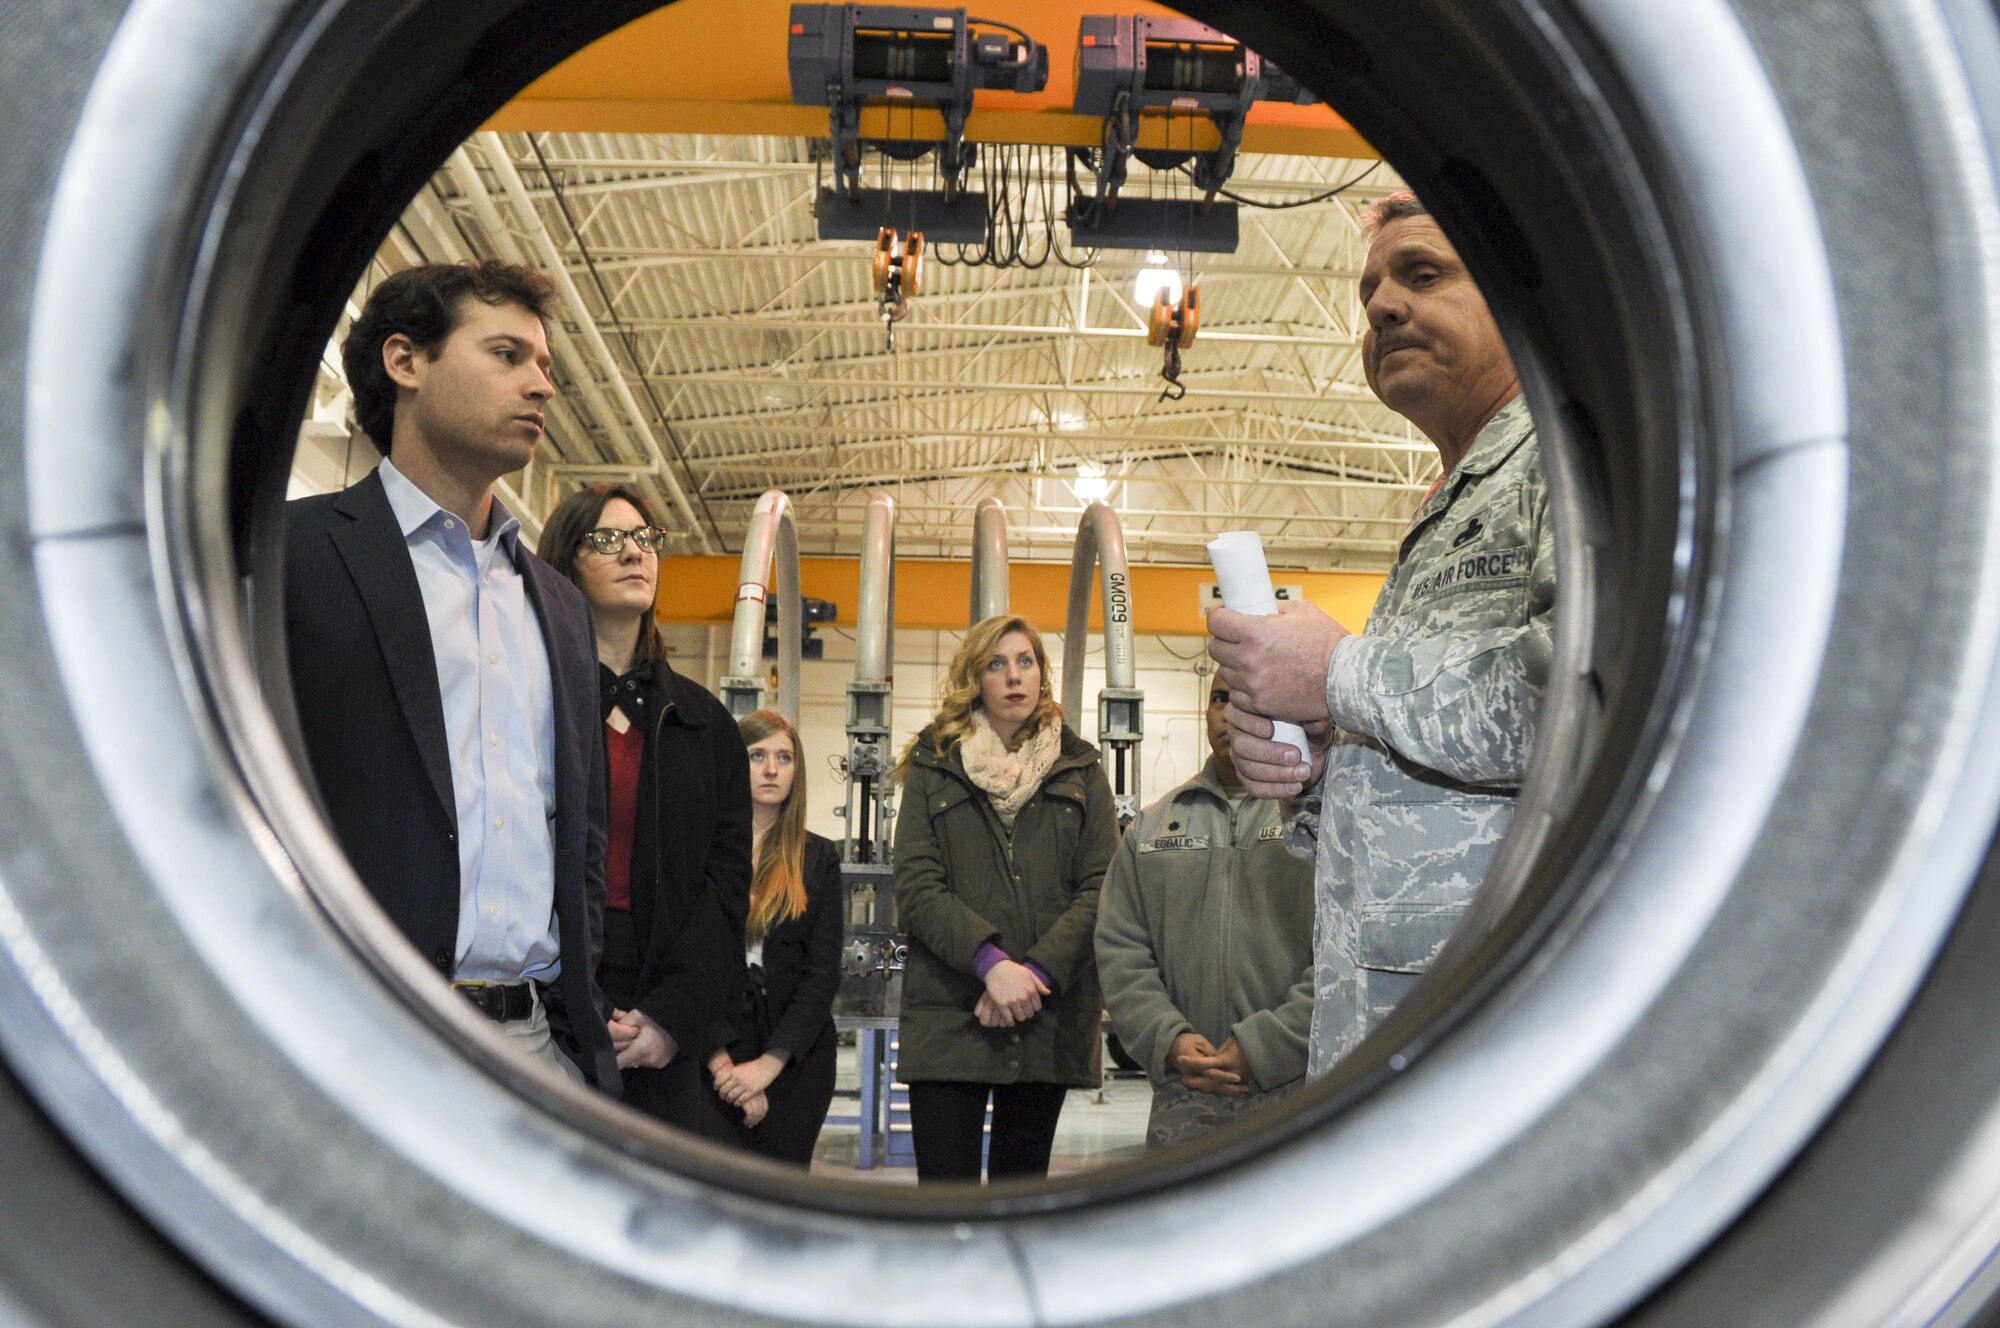 NAVAL AIR STATION FORT WORTH JOINT RESERVE BASE, Texas - Senior Master Sgt. Willard Brinson, 301st Maintenance Group engine shop, briefs 11 Congressional staffers Jan. 21 on equipment used to rebuild and maintain F-16 engines here. Serving to inform Capitol Hill defense staffers of Air Force Reserve contributions, the delegation visited the 301st Fighter Wing here and toured its Explosive Ordnance Disposal, engine shop and F-16 static display. (U.S. Air Force photo by Ms. Julie Briden-Garcia)